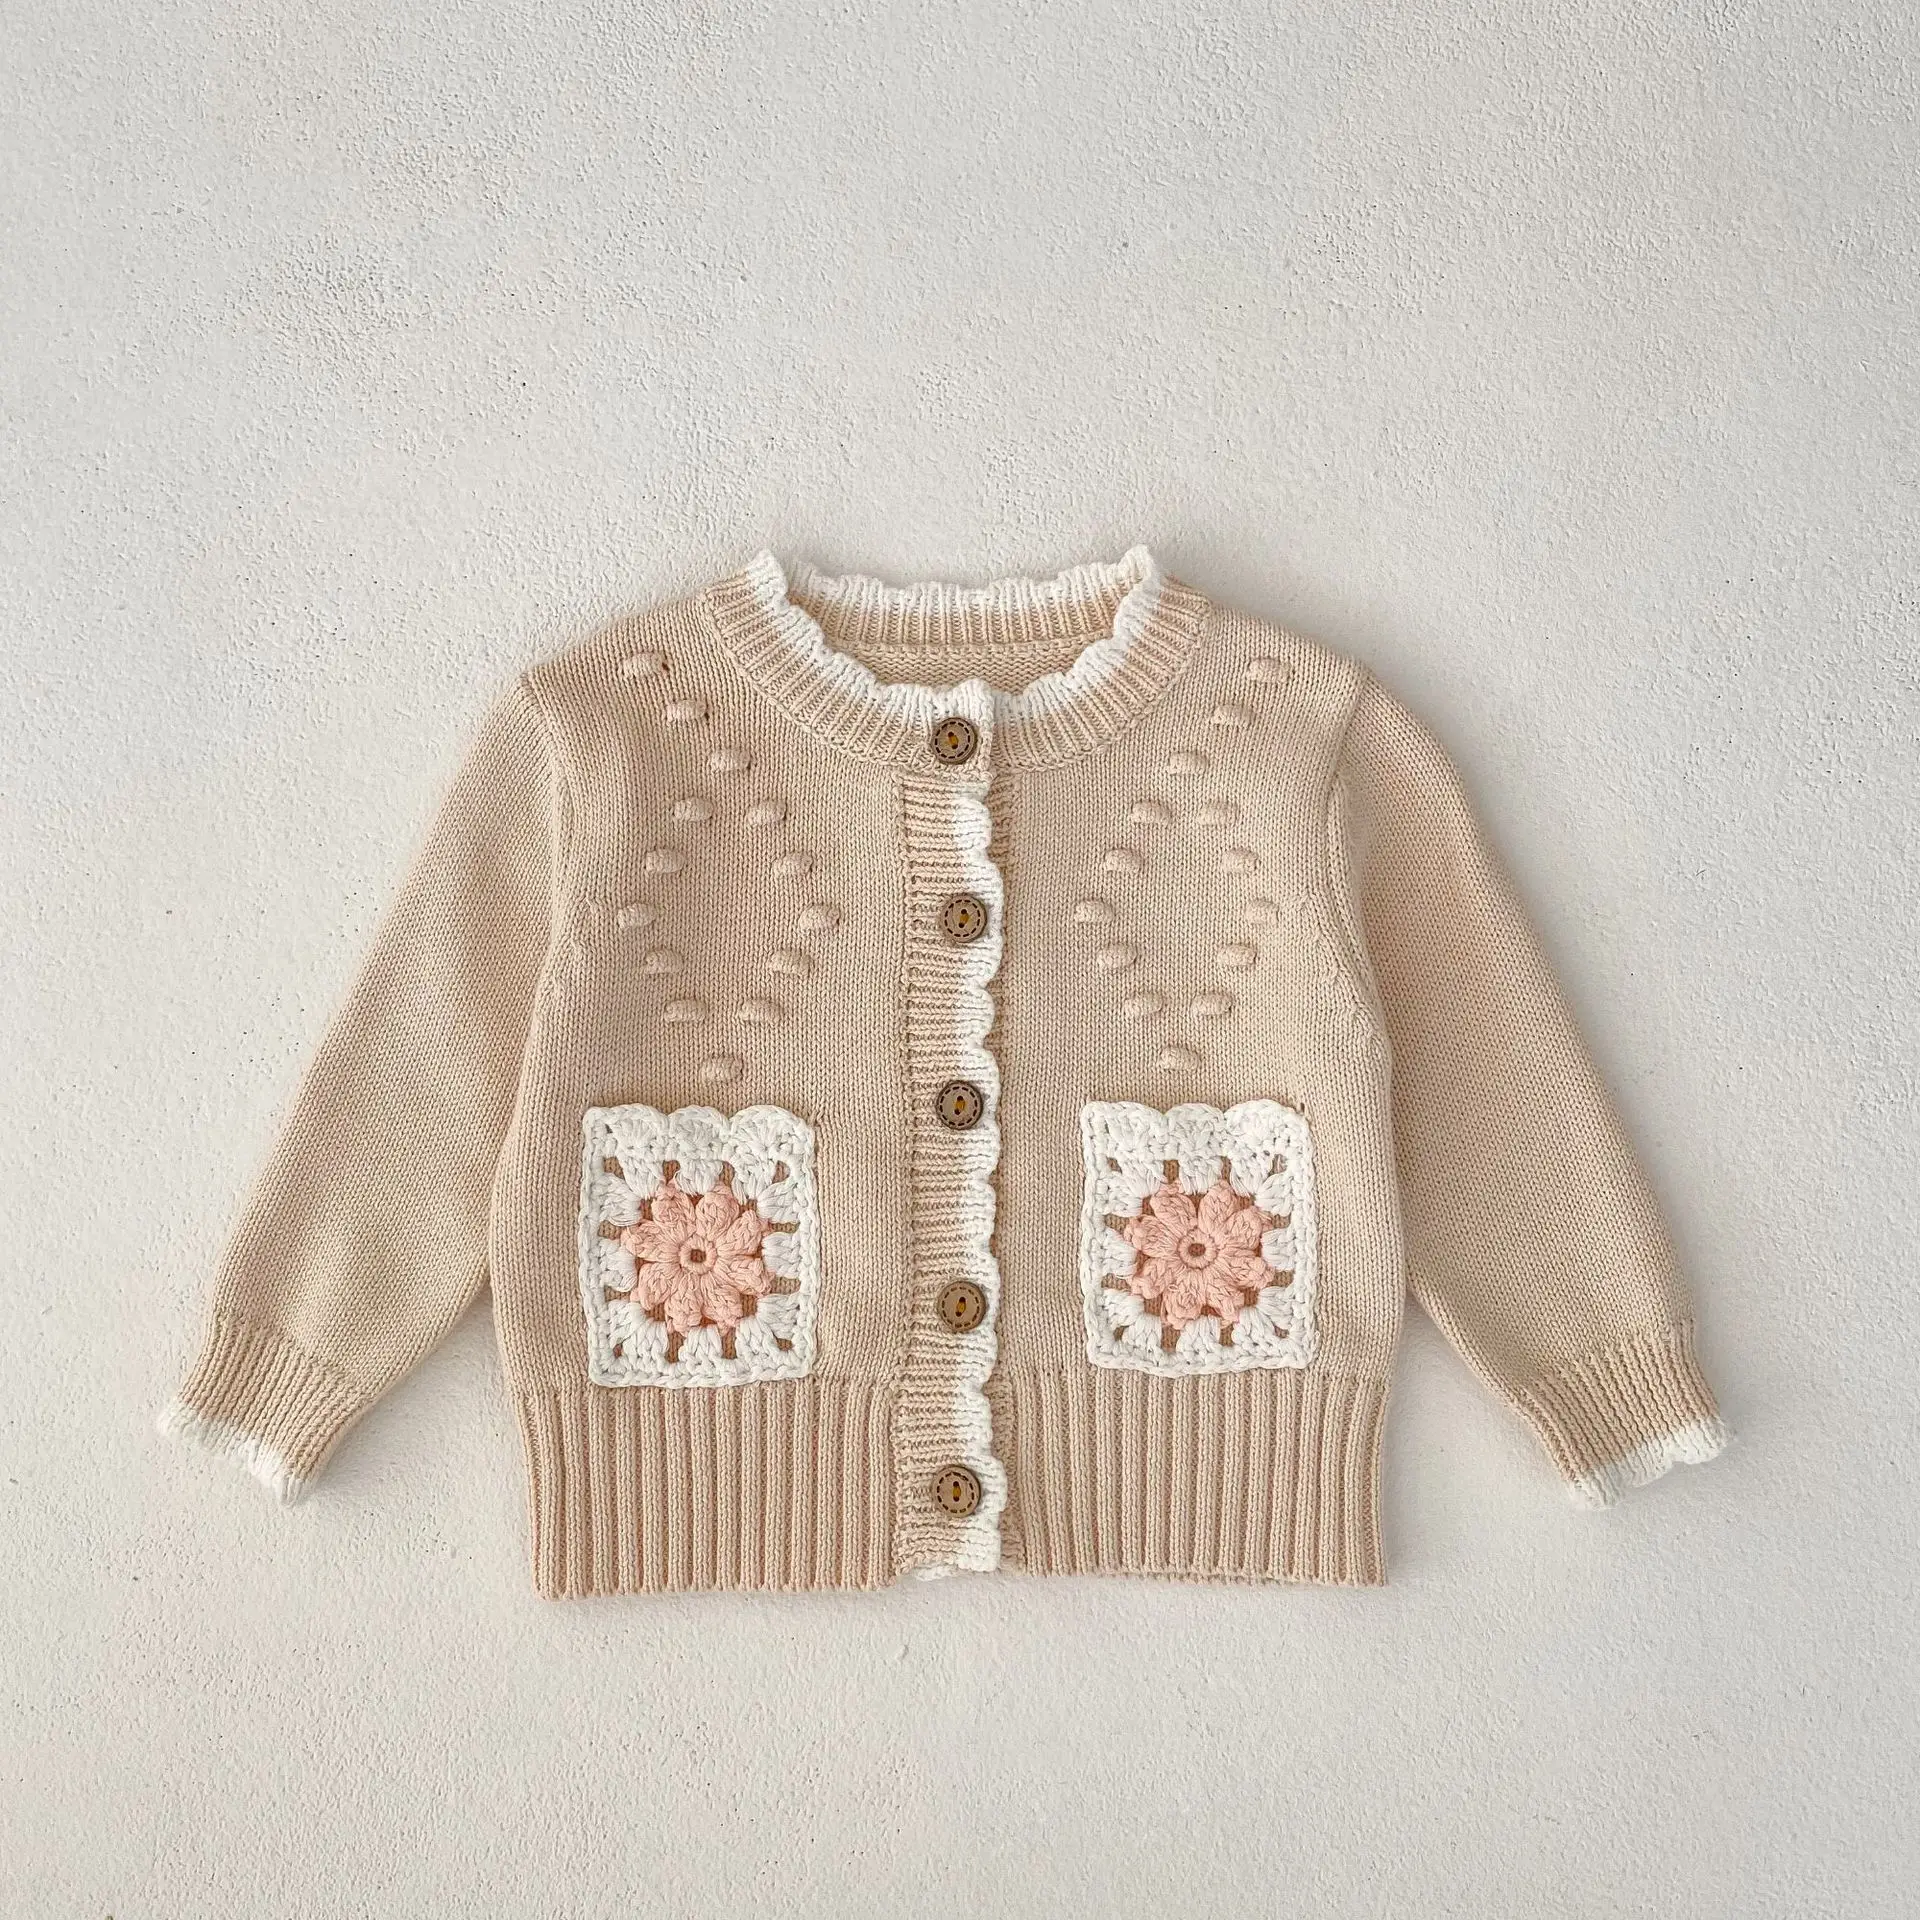 

2023 Autumn New Boy Girl Baby Knited Cardigan Hollow Out Pockets Sweater Children Cotton Casual Tops Jacket Infant Knitting Coat